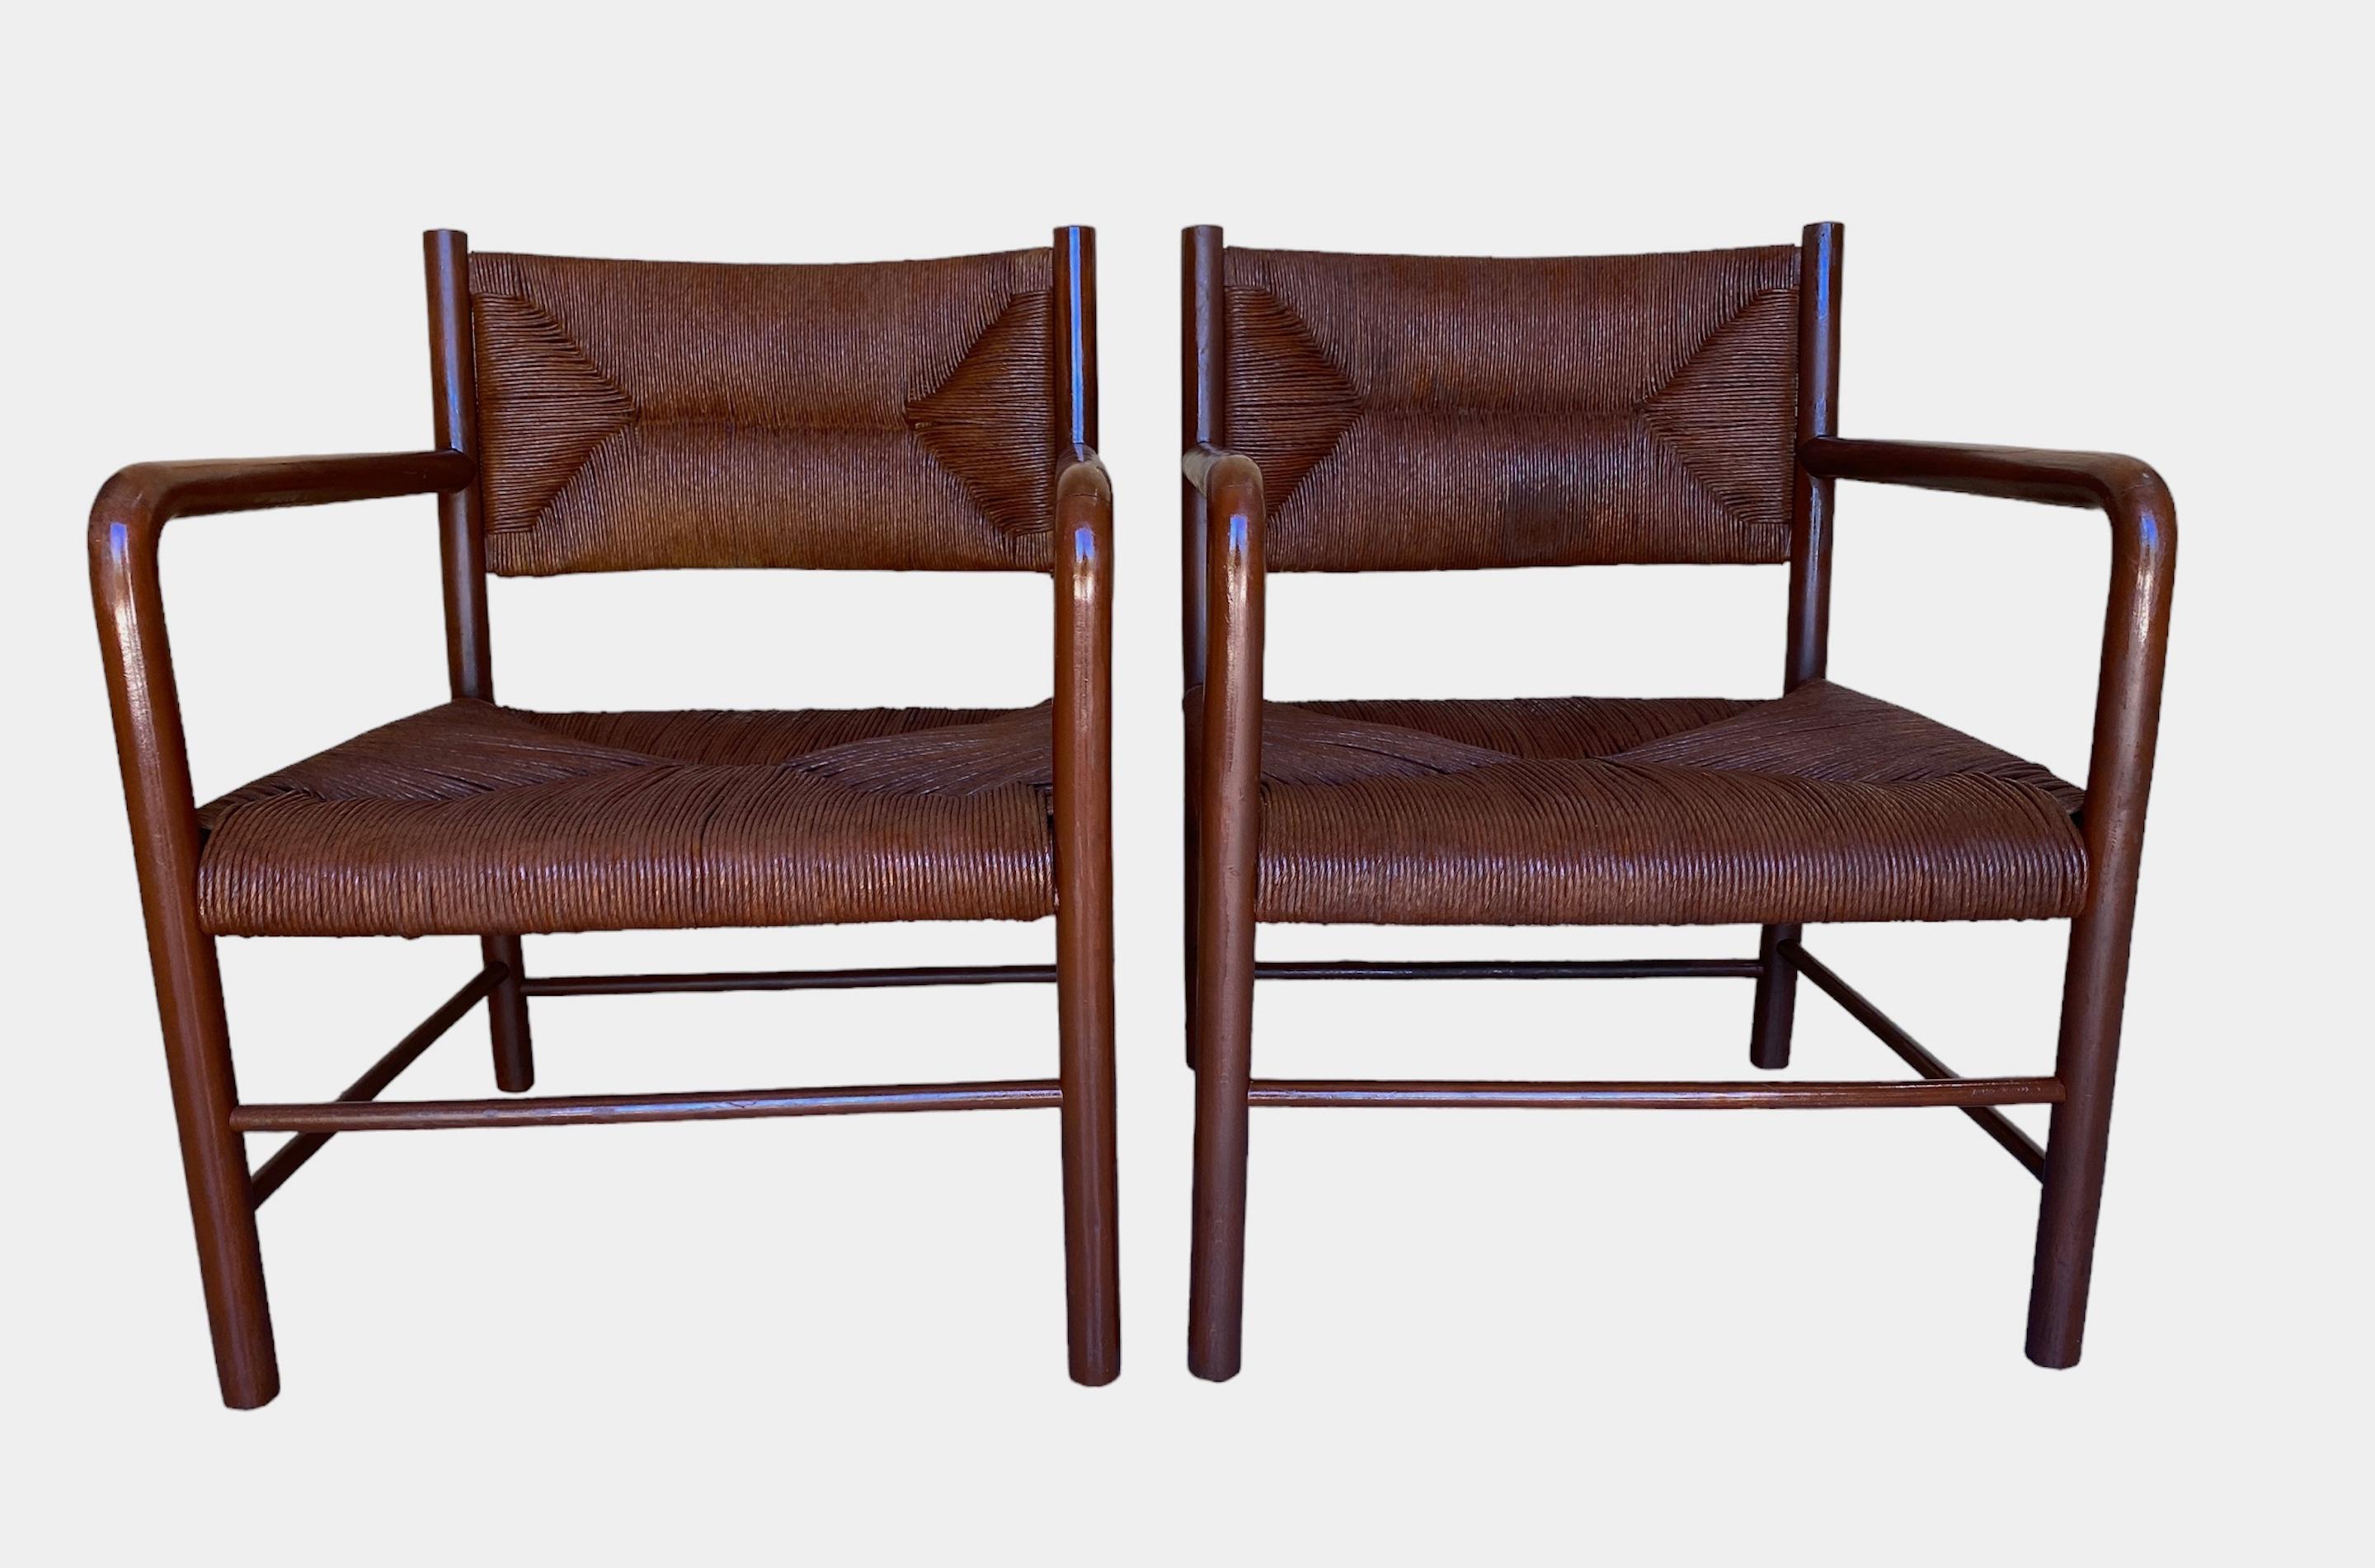 Pair of Emanuele Rambaldi Modernist Brown Lacquered Armchairs, Italy 1940s For Sale 3